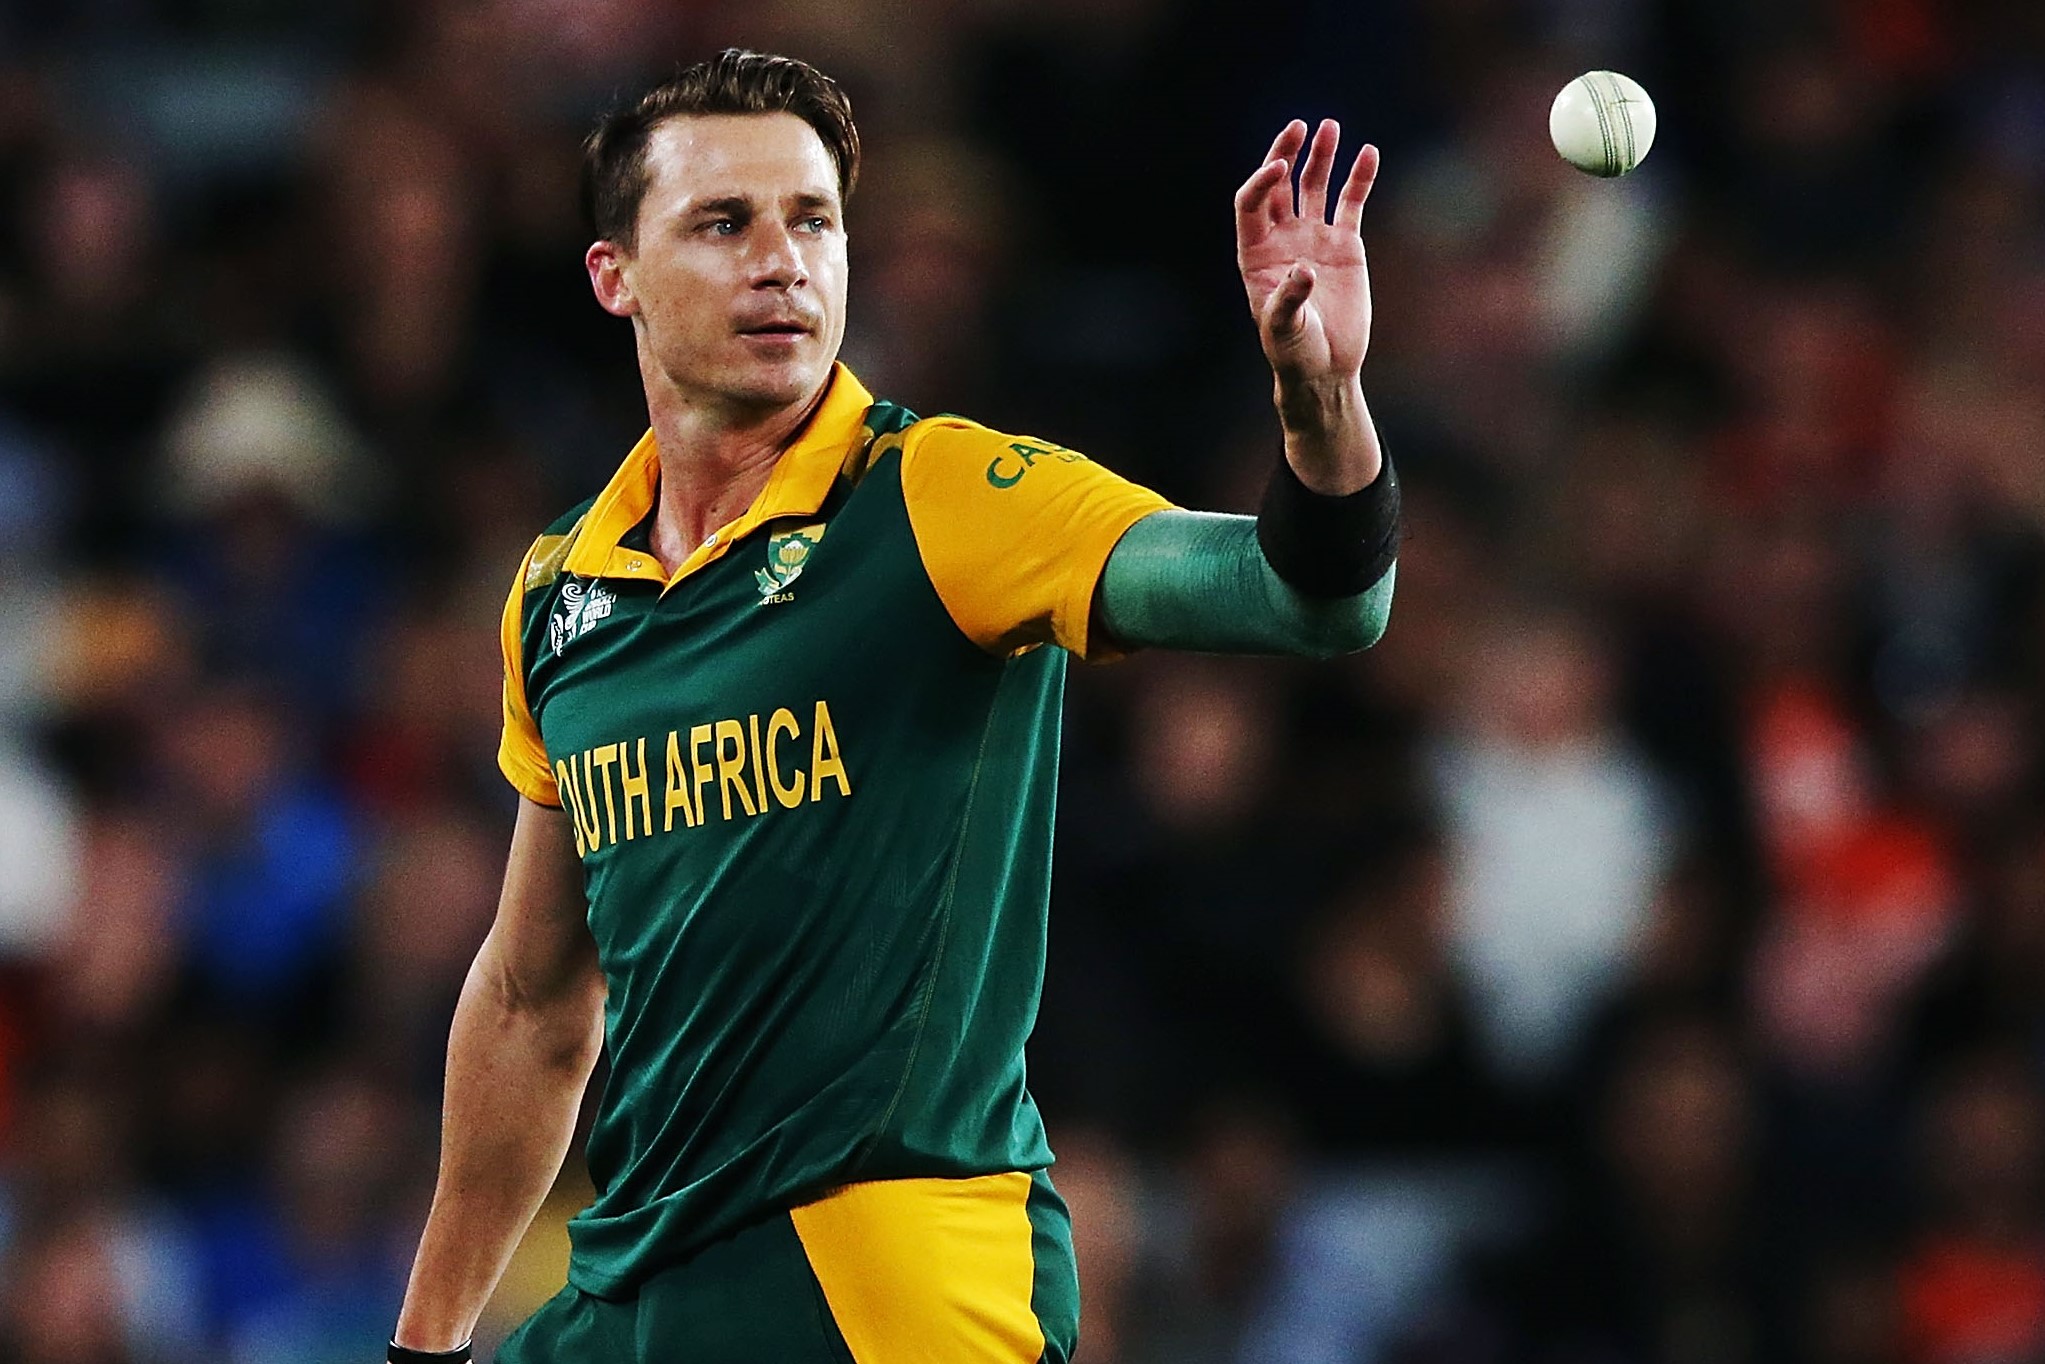 Dale Steyn - Most Successful South African Cricketers of All Time